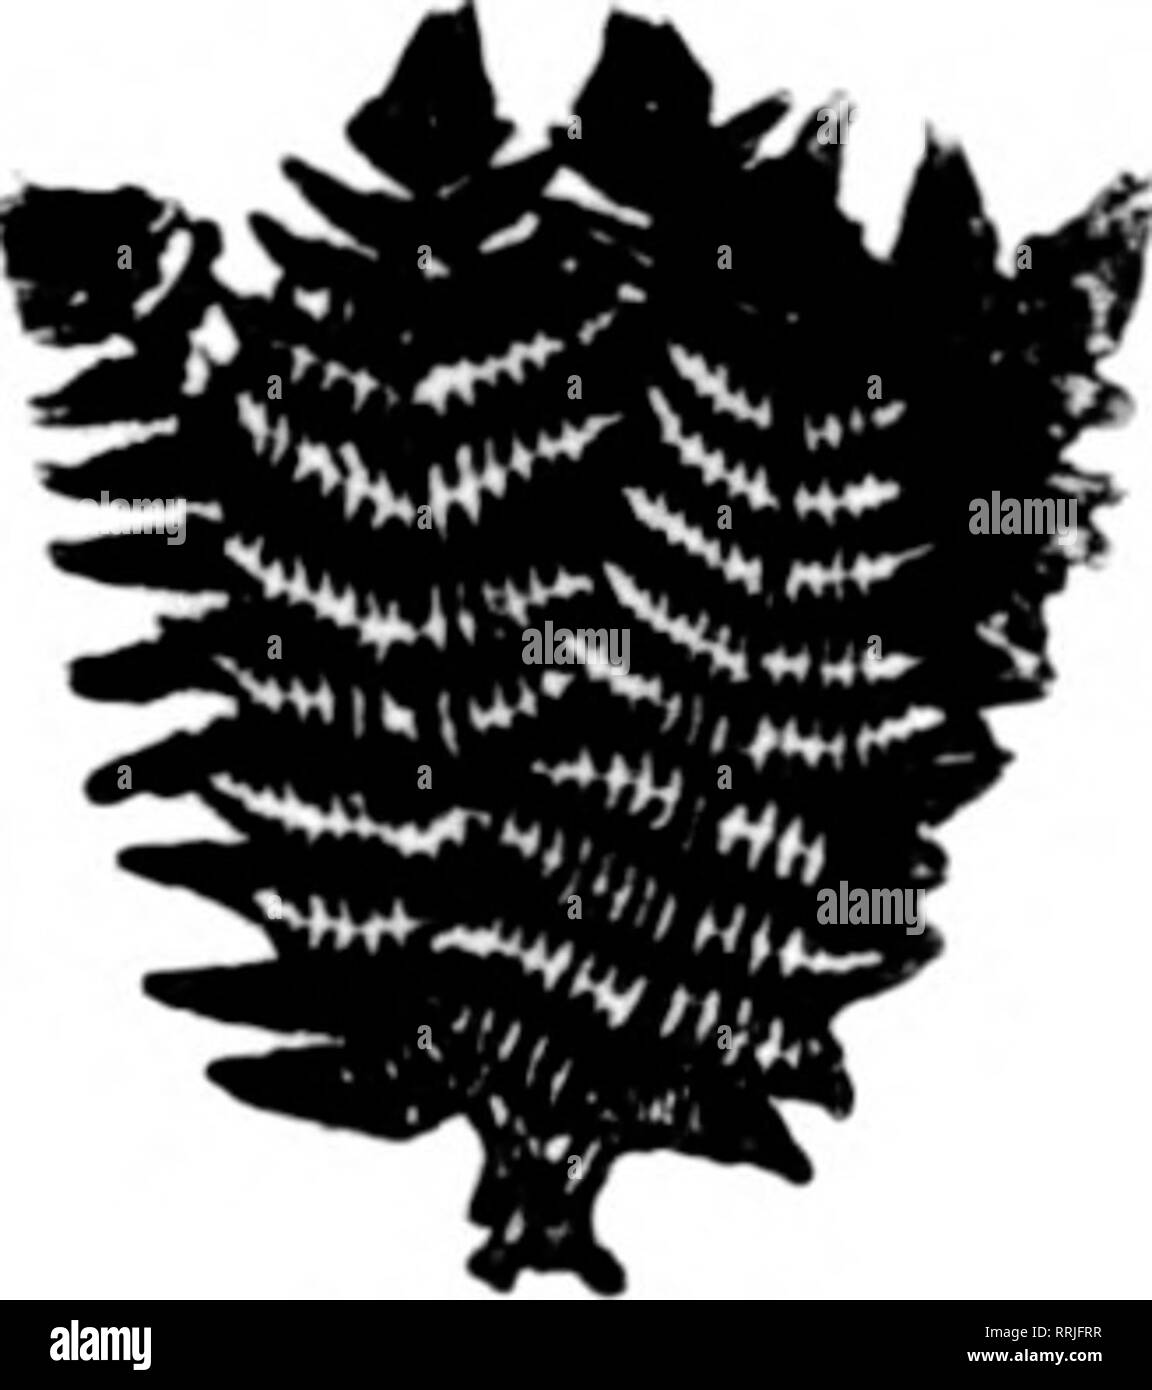 . Florists' review [microform]. Floriculture. Mention The Rerlew when yog wrtf. ^ . . Heailquarters f«r Fancy ^^WLJ/jF f*'«* *nii AH Greens ^H^Hj^^ The Best at Lowest ^^^^F Fancy Ferns, large, ^^r and Dagg:er Ferns. A KXN), 6()c. Bronze Galix, 1000,45c. Rronze Leucothoe Sprays, lOOO. $1.90. Green Leuco- thoe Sprays. ICOO, $1.7,5. Finest Ground Pine, per 5l)-lb. Aif' A • ? ^^''^* Mots, fine large sheets, per lb., 2c. AIL orders given prompt attention and satisfaction guar- anteed. Terms, cash with order. «• H. PRESNELL. R. R. 1. Del Klo. Tenn. Mention The Re-riew when yon write. L. B. Brague &a Stock Photo